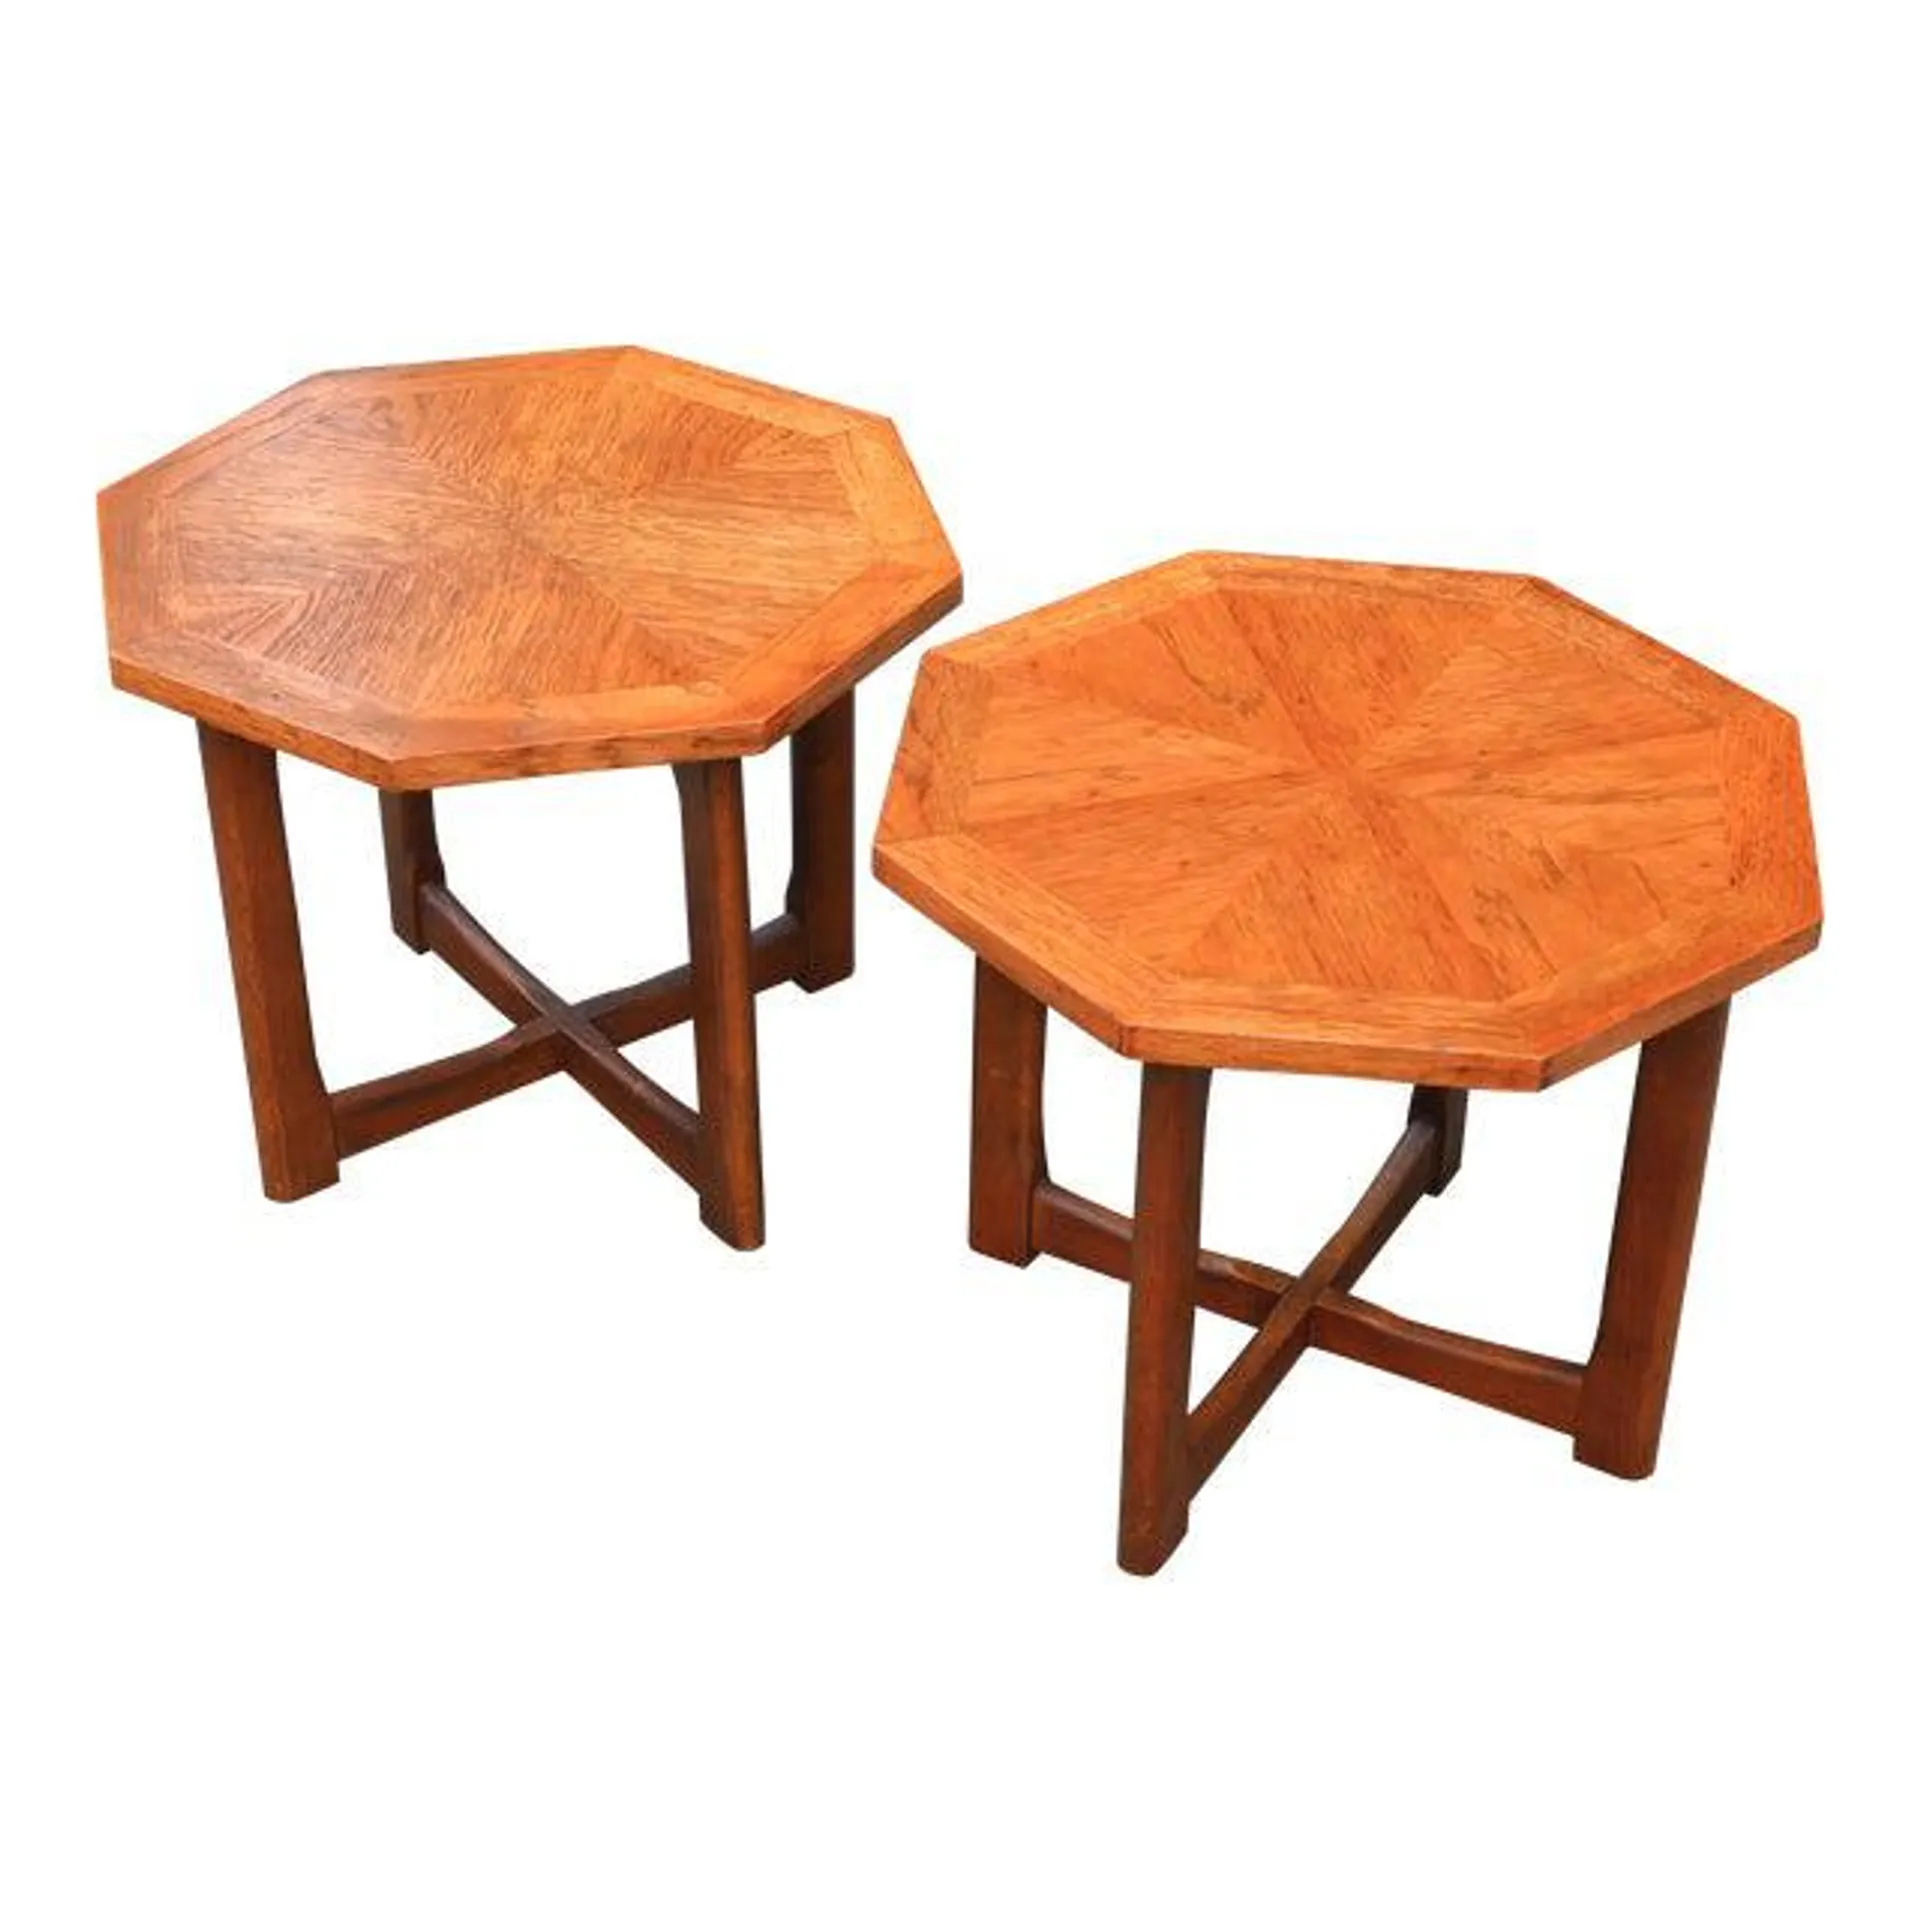 Mid-Century Octagon X Base Side Tables by Lane Furniture Company - Pair